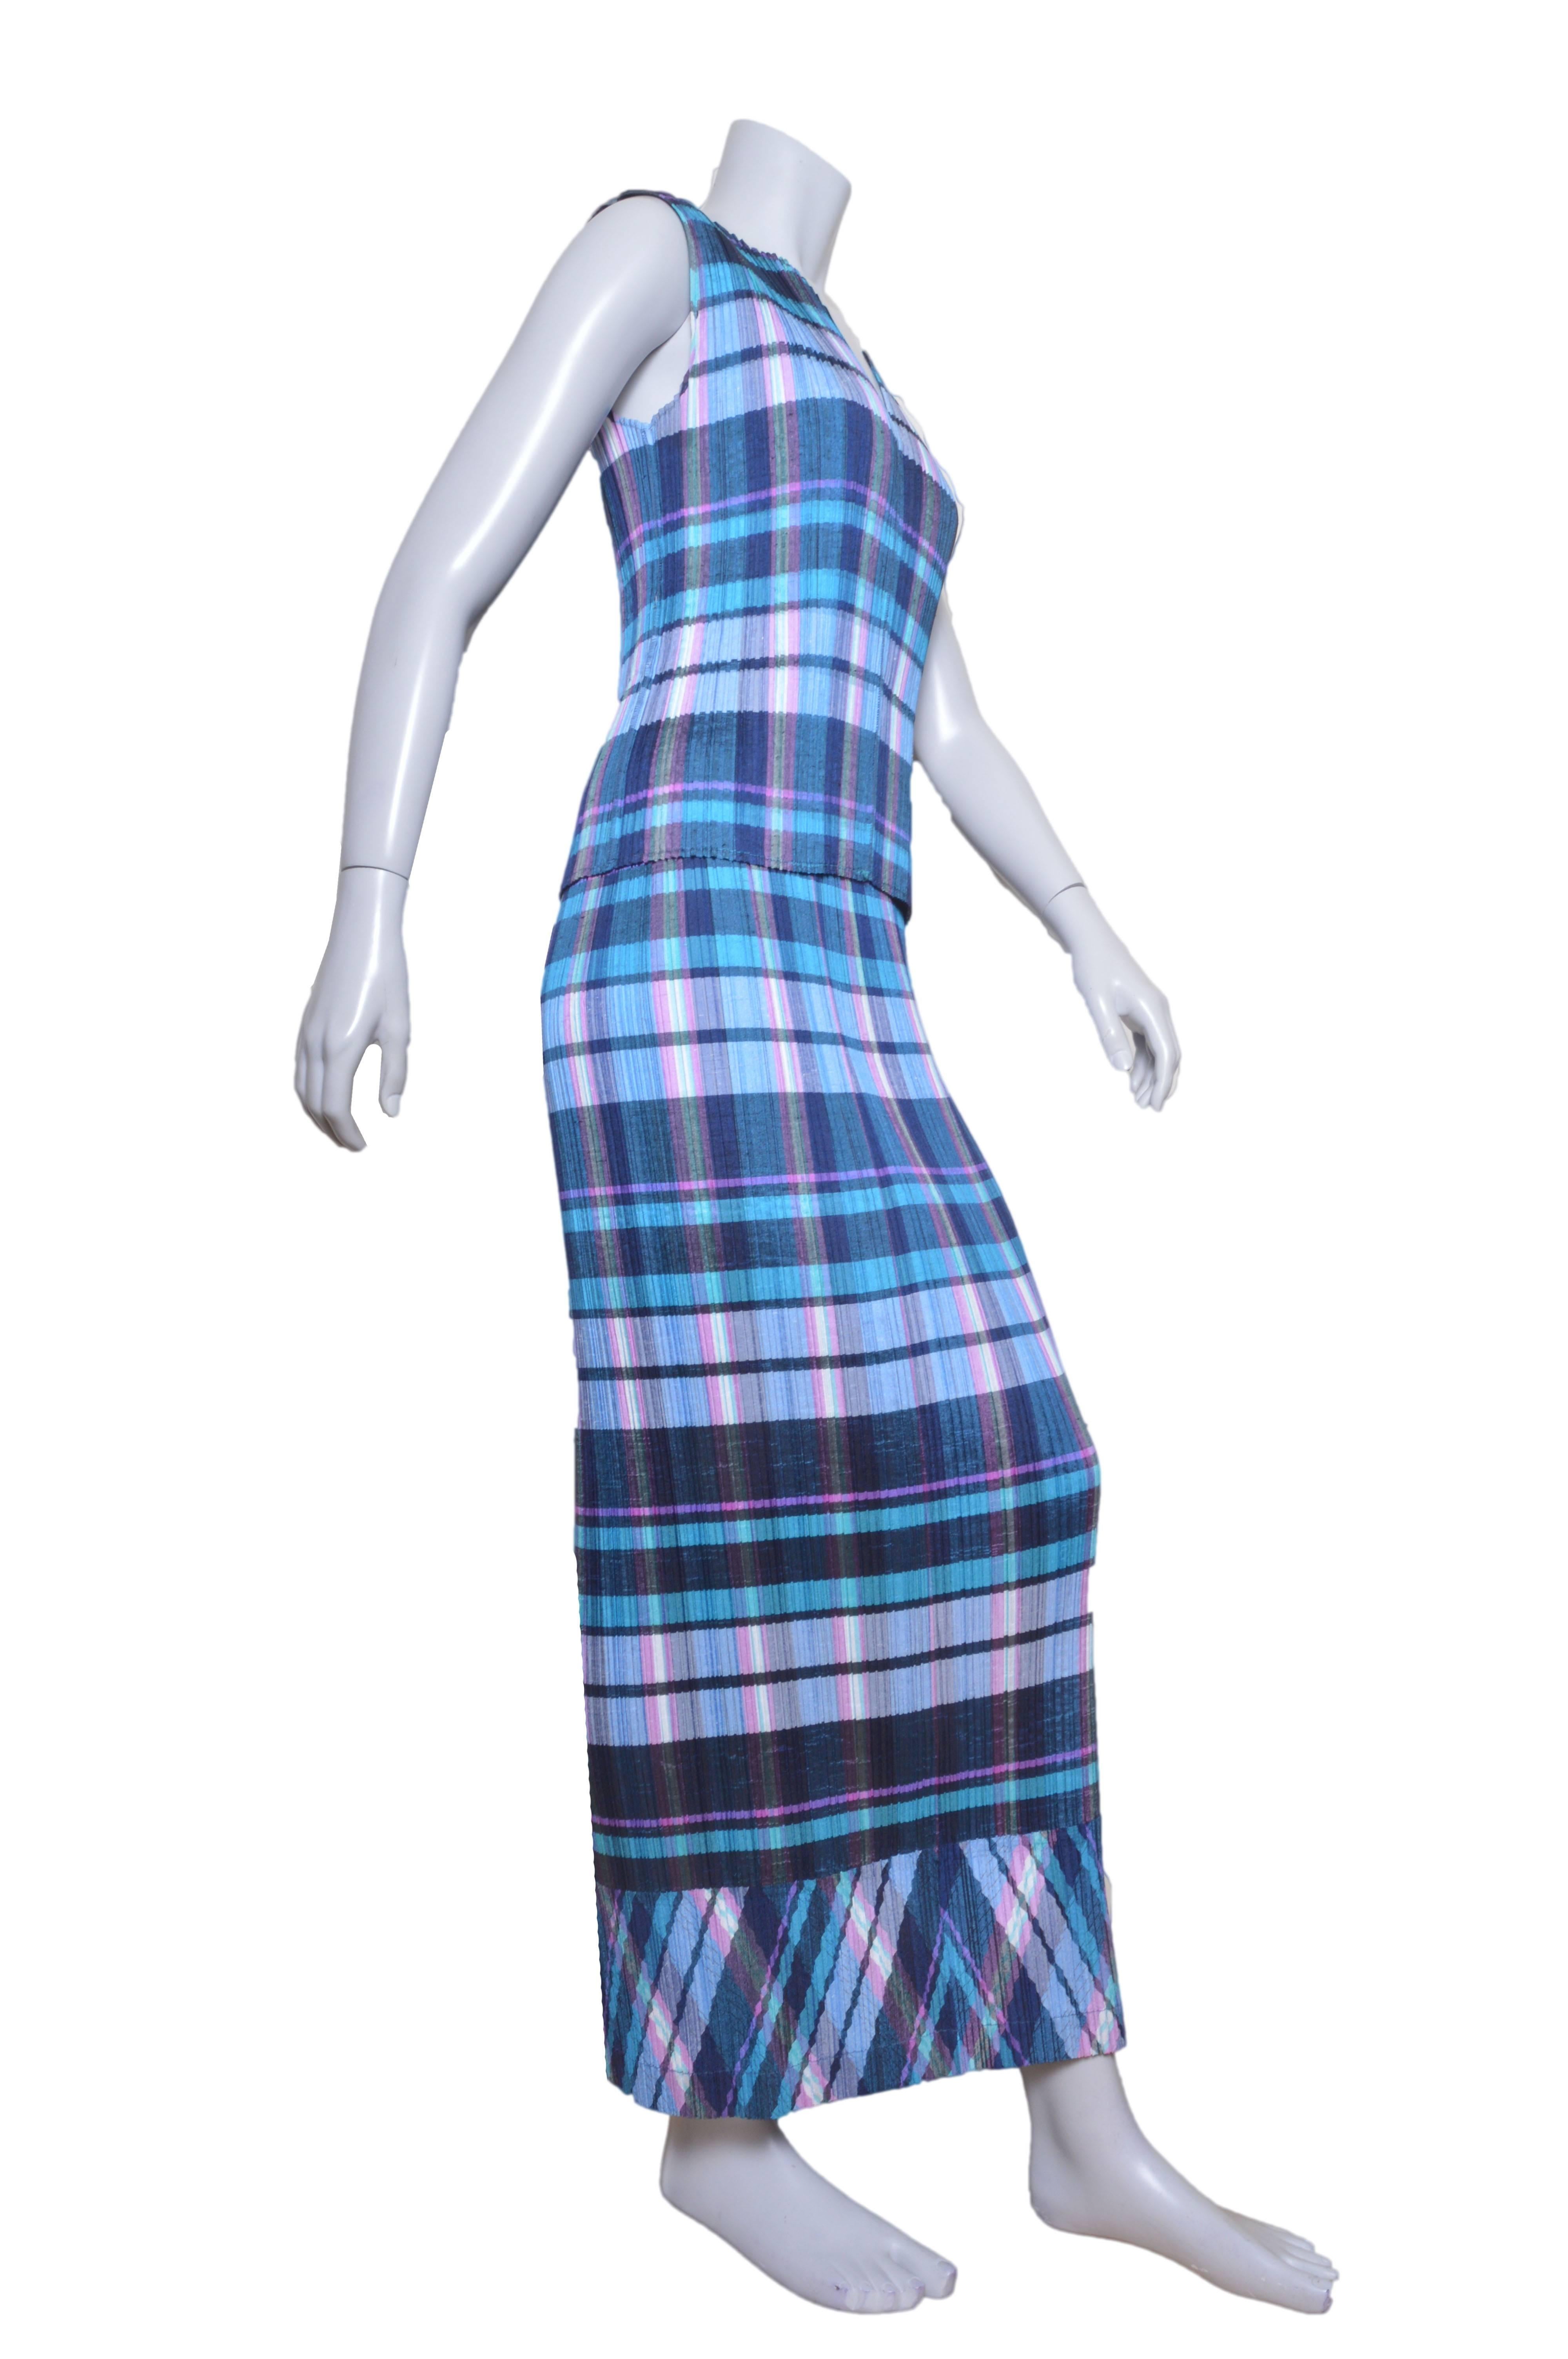 Timeless Issey Miyake plaid skirt and blouse set.
All over vertical pleating.
Deep blue, teal, purples and a bit of turquoise.
Blouse is sleeveless with V notch collar.
Long straight skirt with contrasting diagonal plaid hem detail.
Elastic